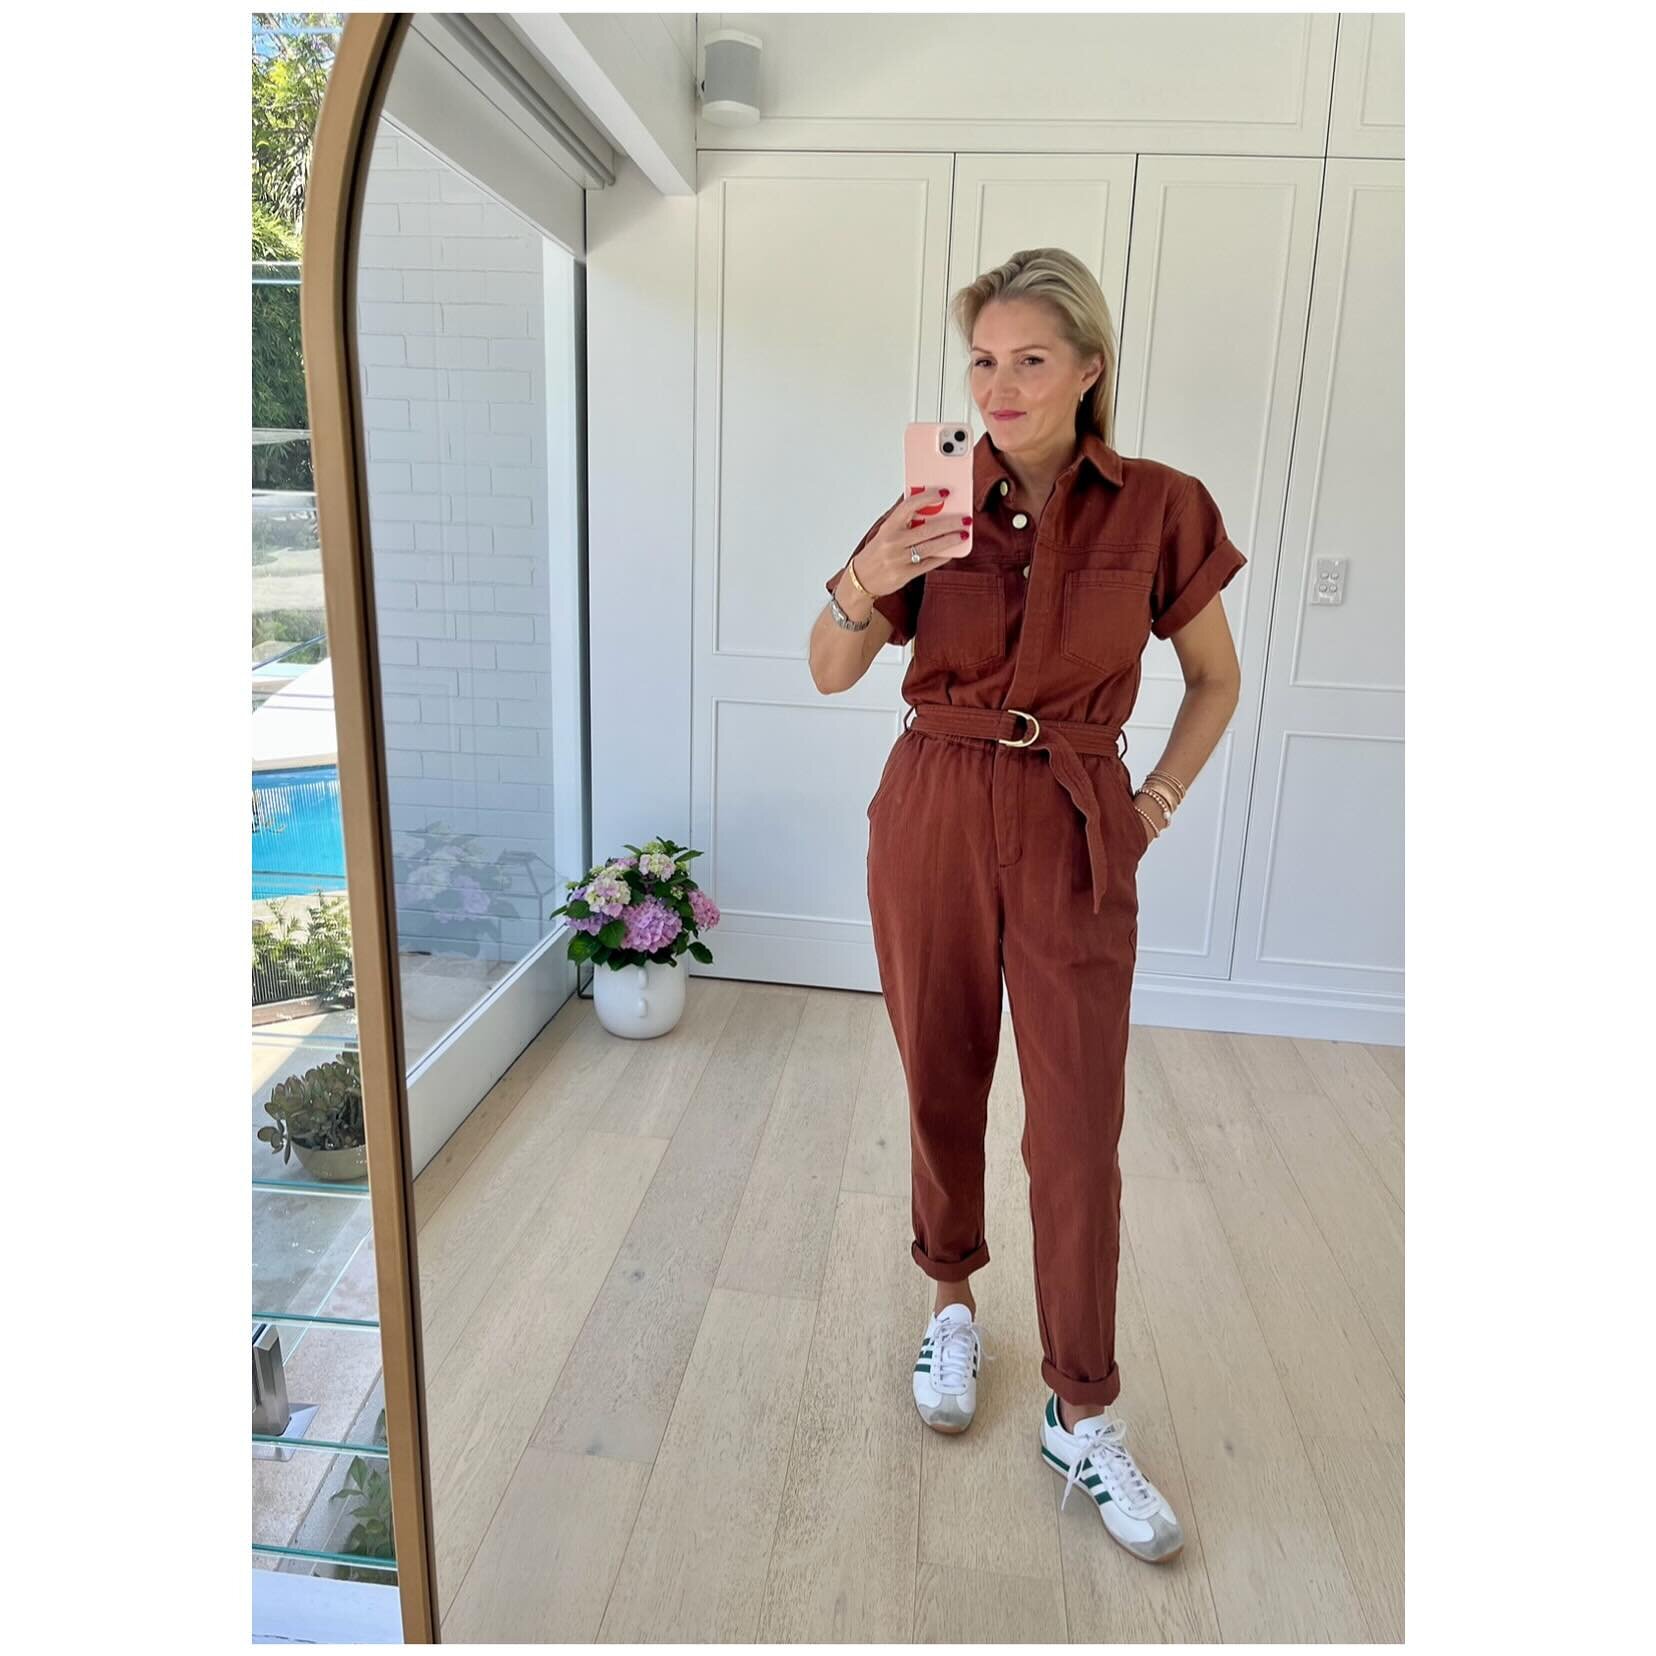 { MY UNIFORM } - this is an old photo of a jumpsuit I&rsquo;ve worn over &amp; over ✨✨ Jumpsuits are like a dress - pop it on and you&rsquo;re ready to go ✨✨
#kivari_the_label #georgiegeorgestyle